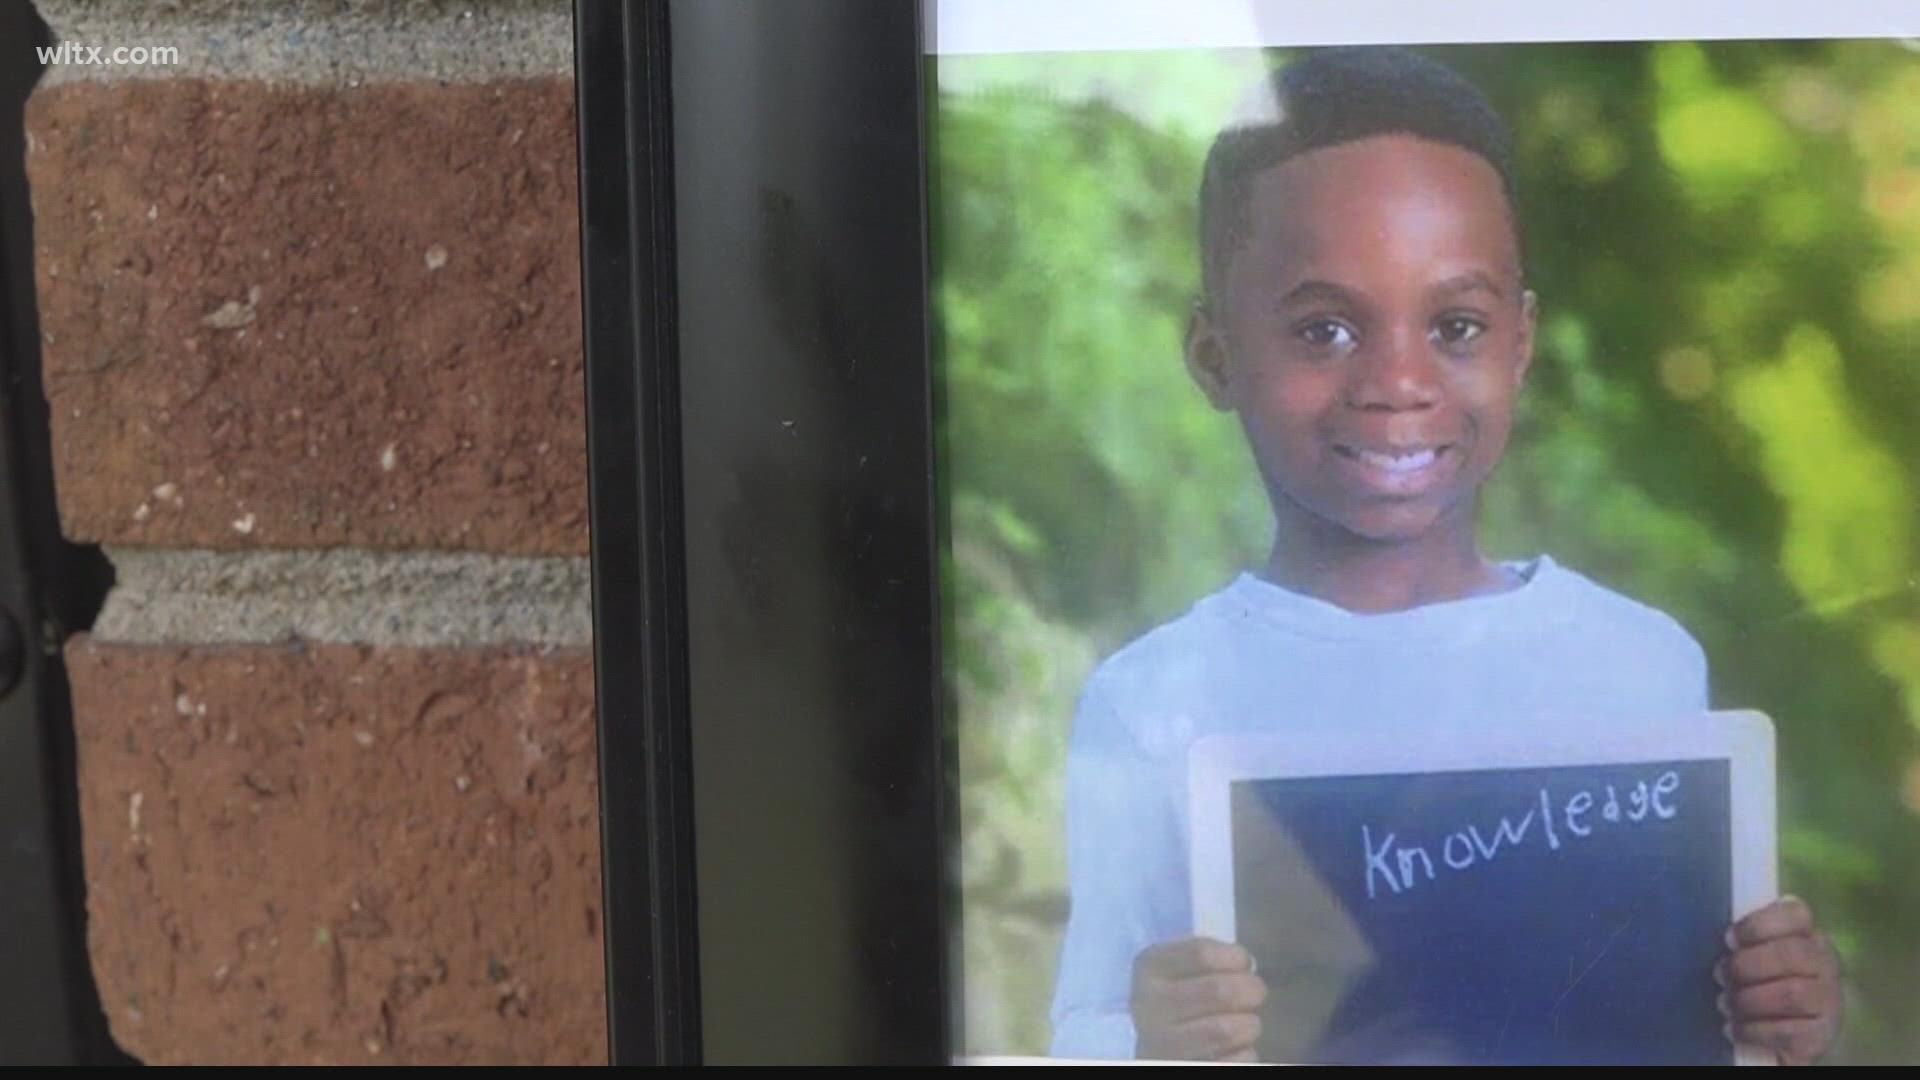 Columbia police have arrested two suspects in the fatal shooting of 7-year-old Knowledge Sims and have another in custody.